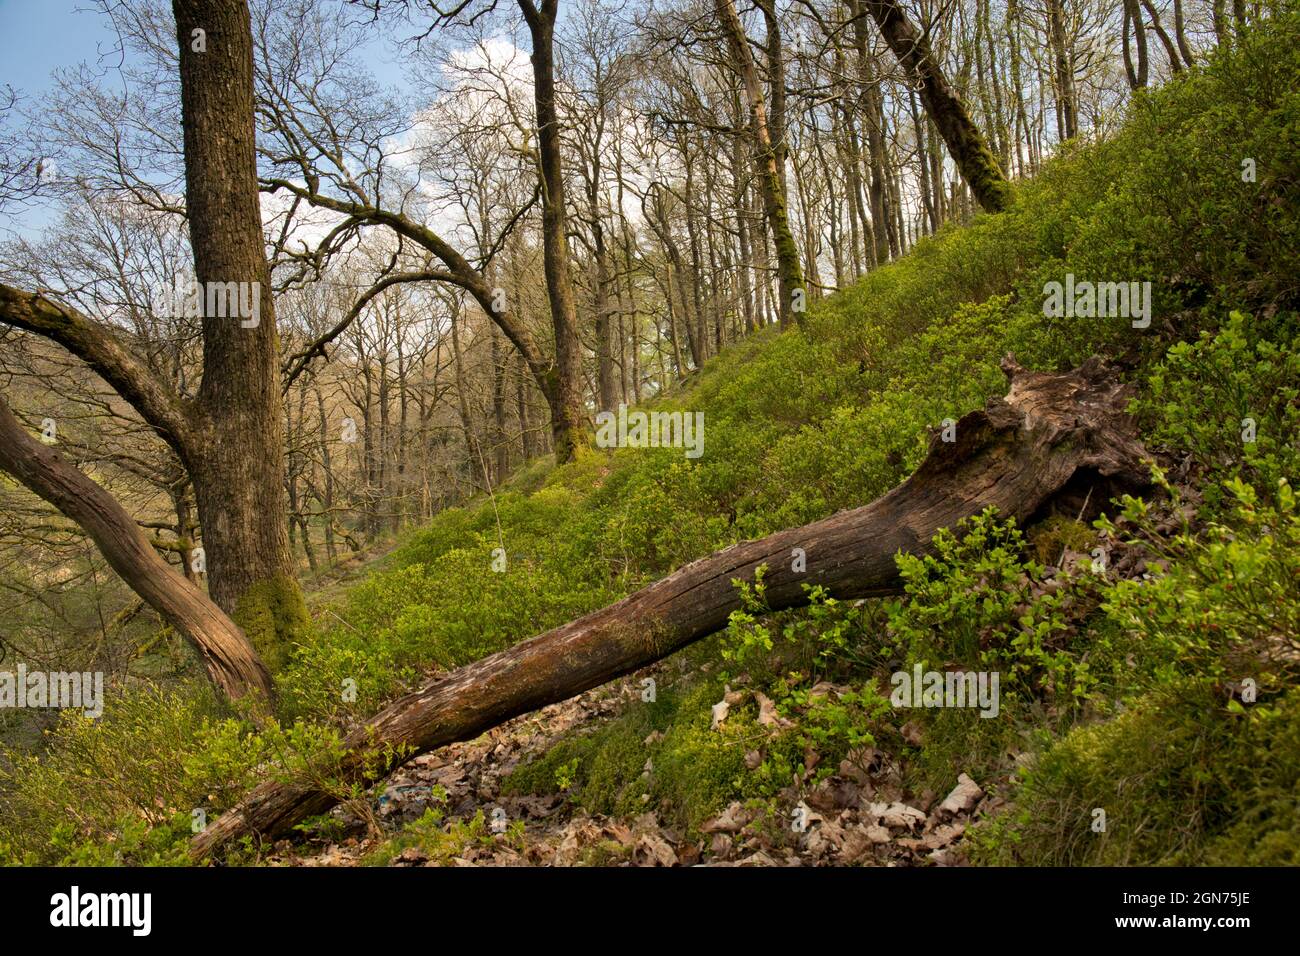 View of a Sessile oak (Quercus petraea) woodland with an understorey of Bilberry in early spring. Powys, Wales. April. Stock Photo